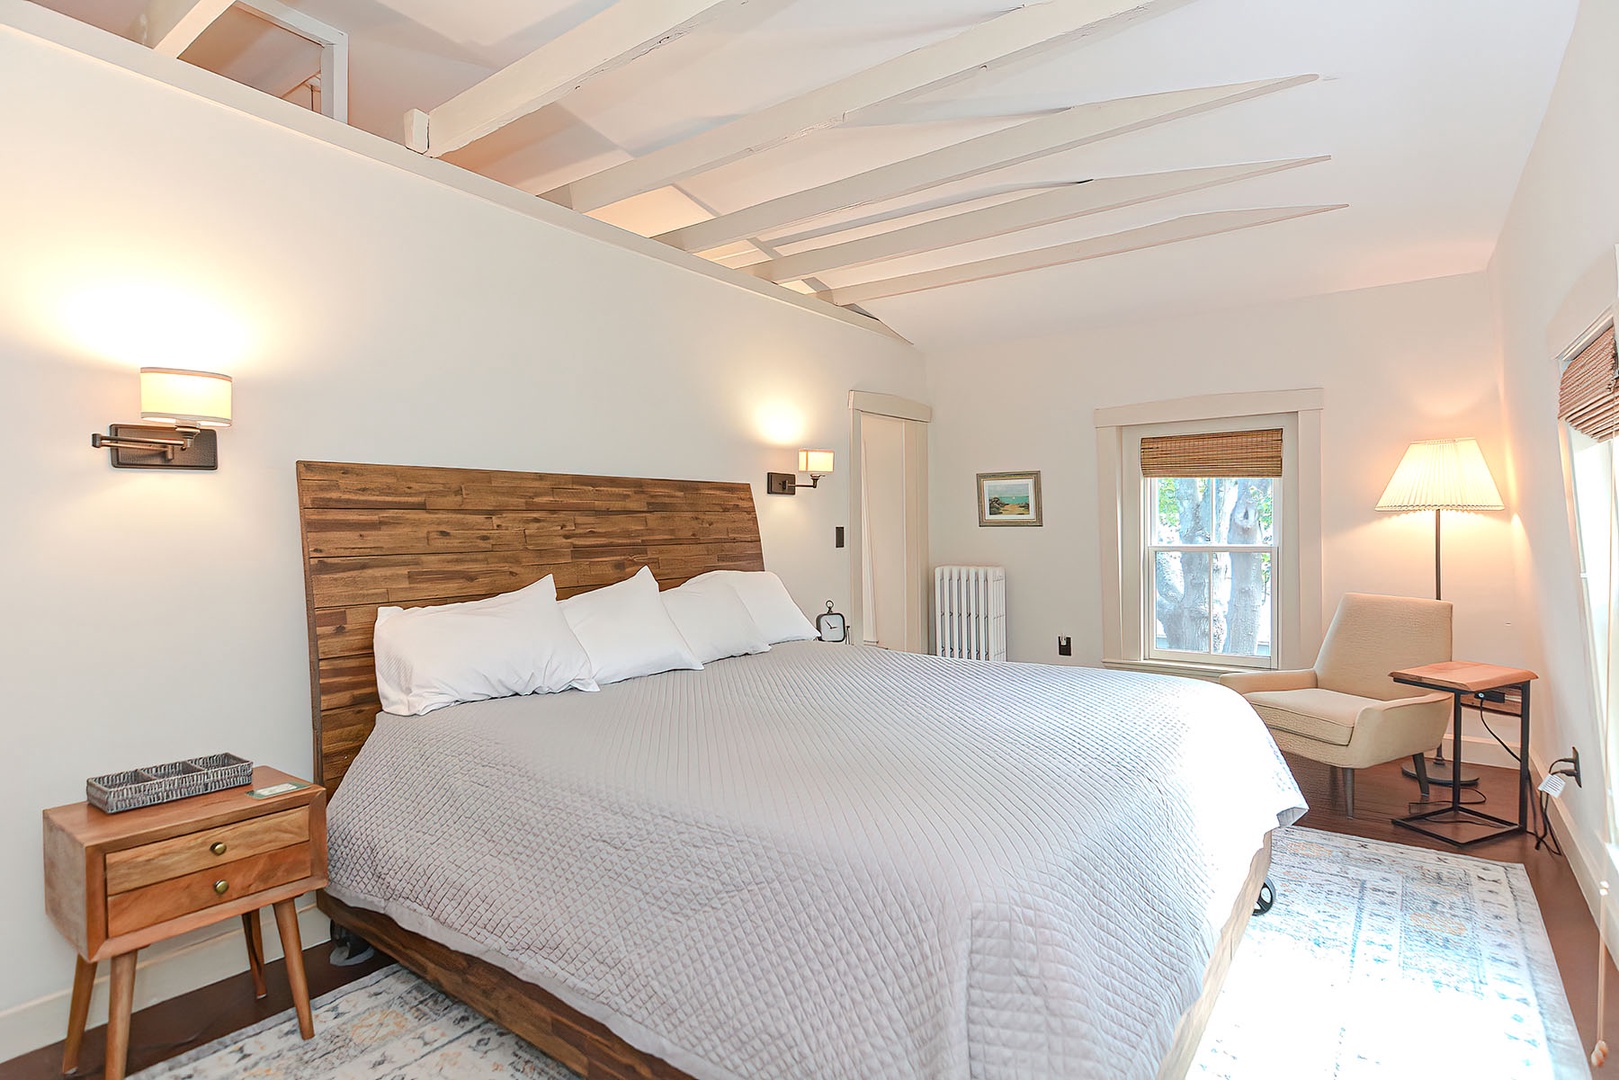 The Primary suite has a King bed and ensuite full bath.